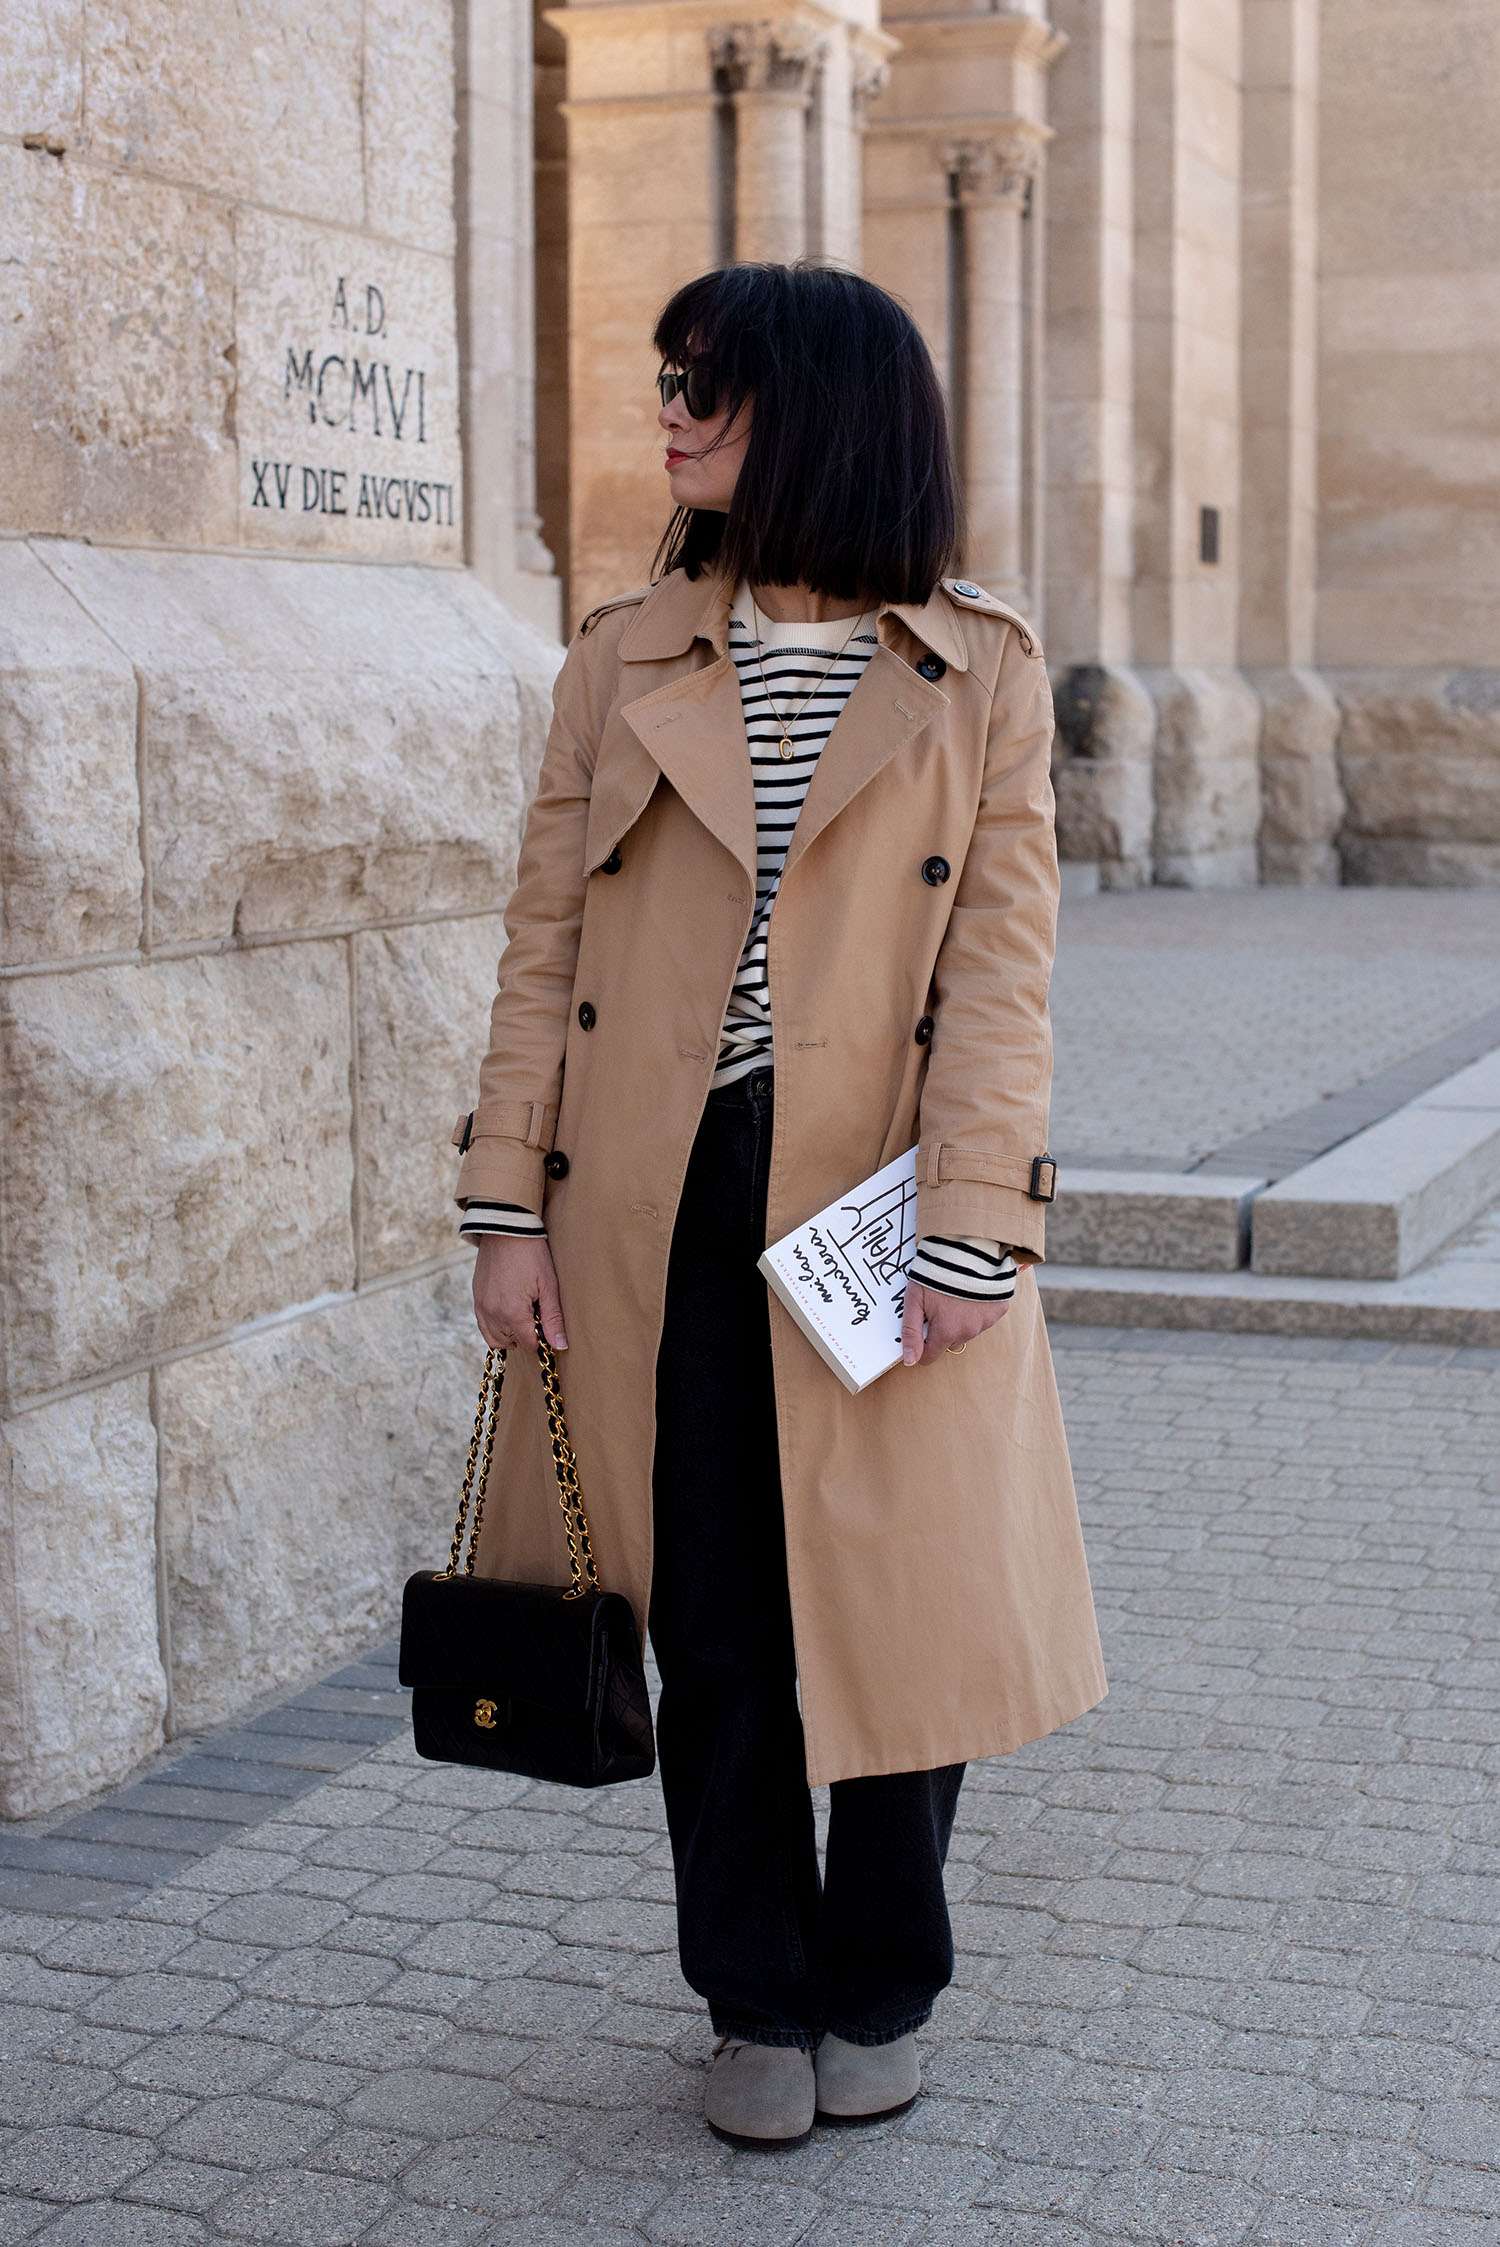 Coco & Voltaire - Mango trench, Chanel flap bag, H&M jeans